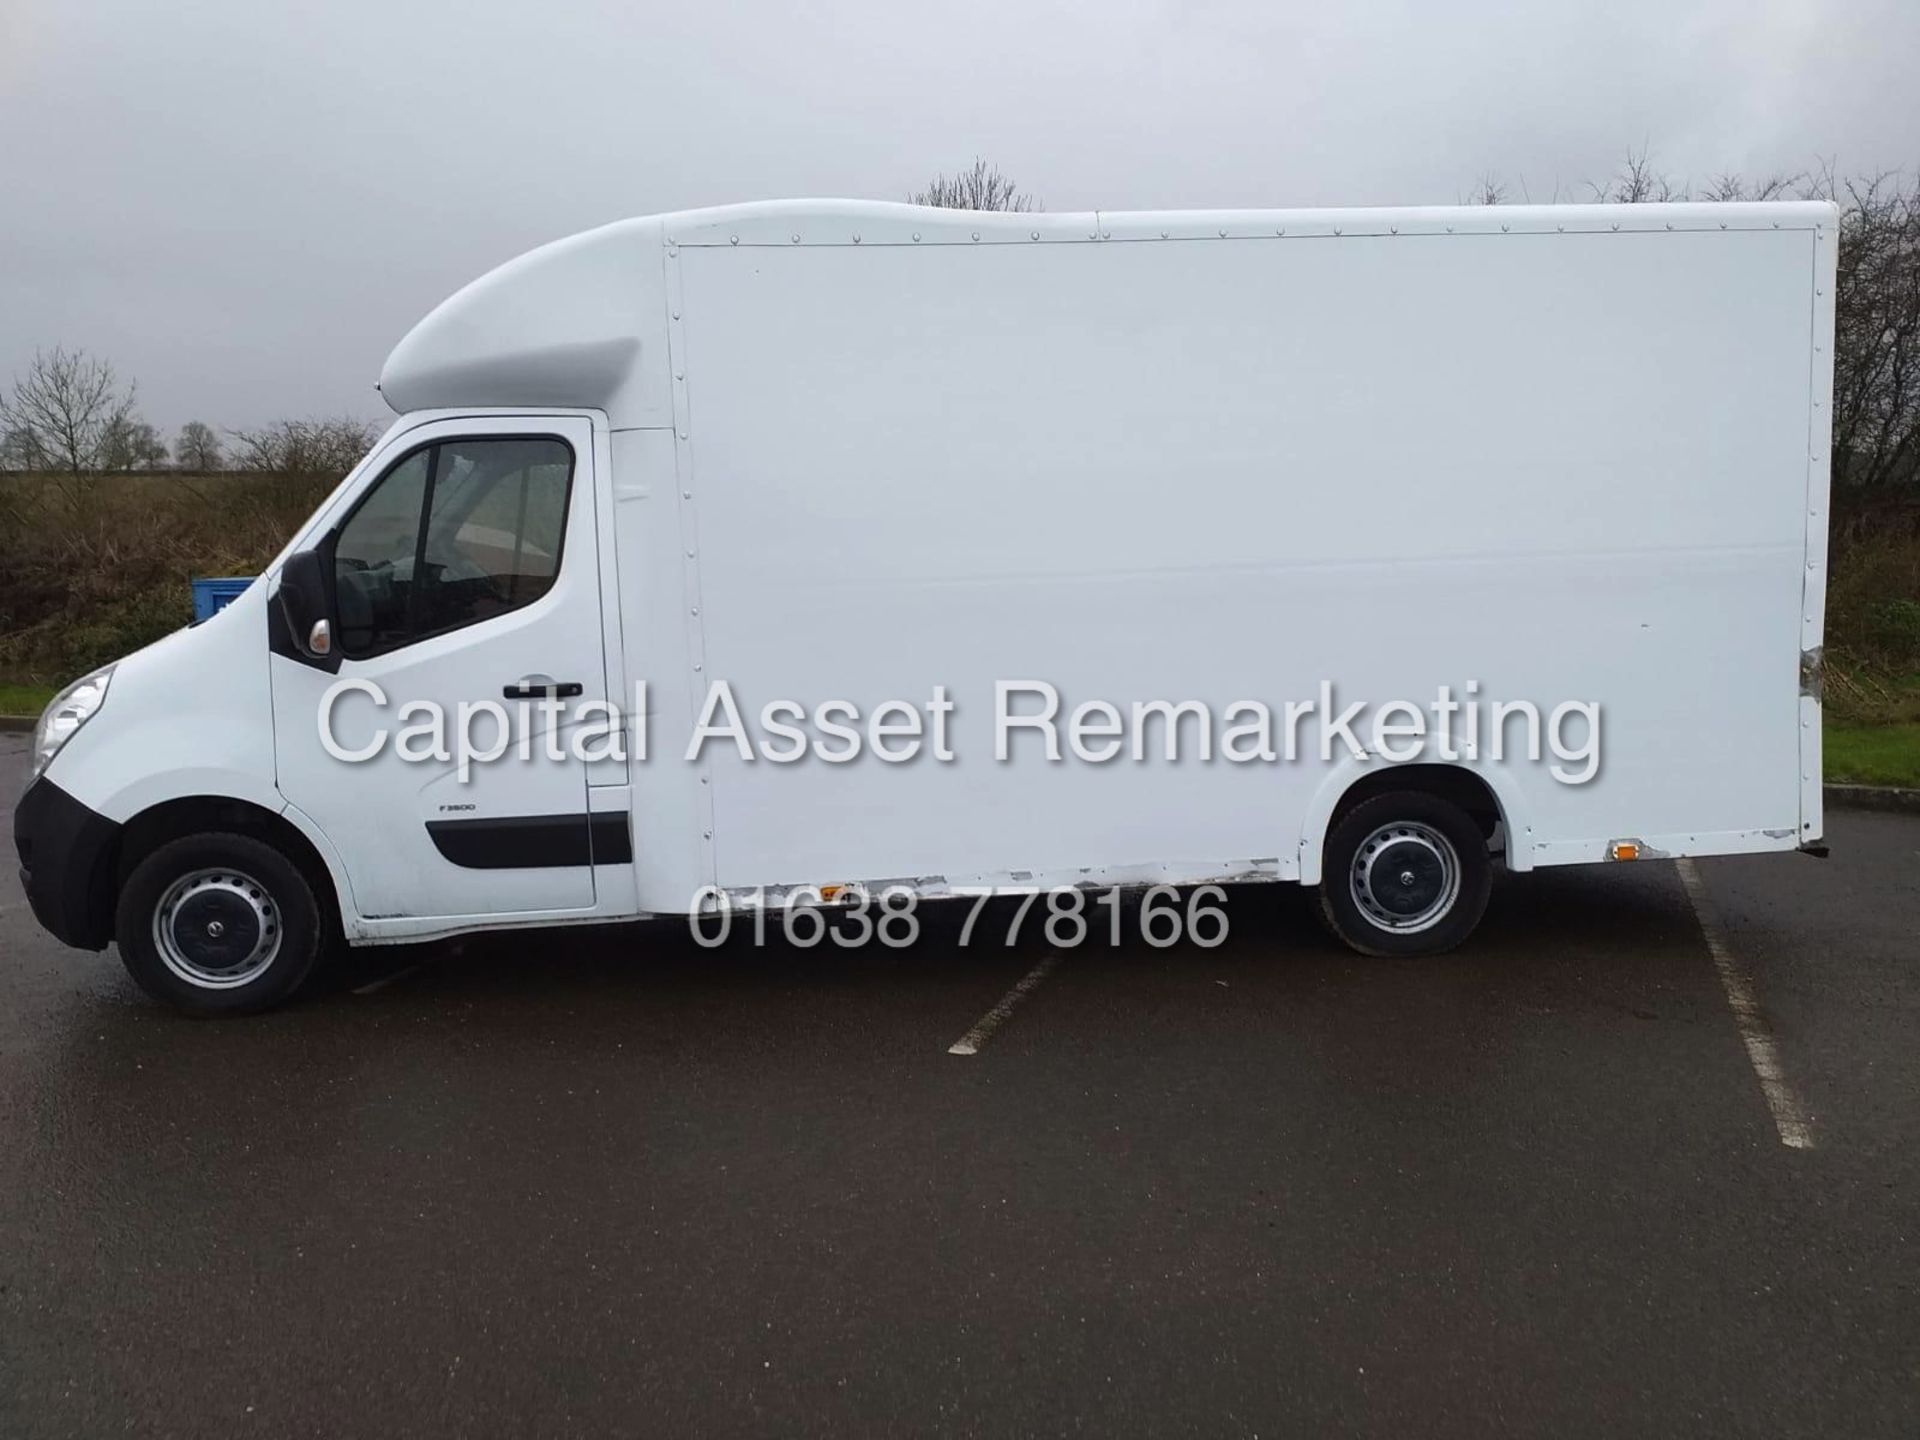 RENAULT MASTER 2.3CDTI "136BHP - 6 SPEED" 15FT LOW-LOADER BODY (2015 MODEL) IDEAL REMOVALS TRUCK